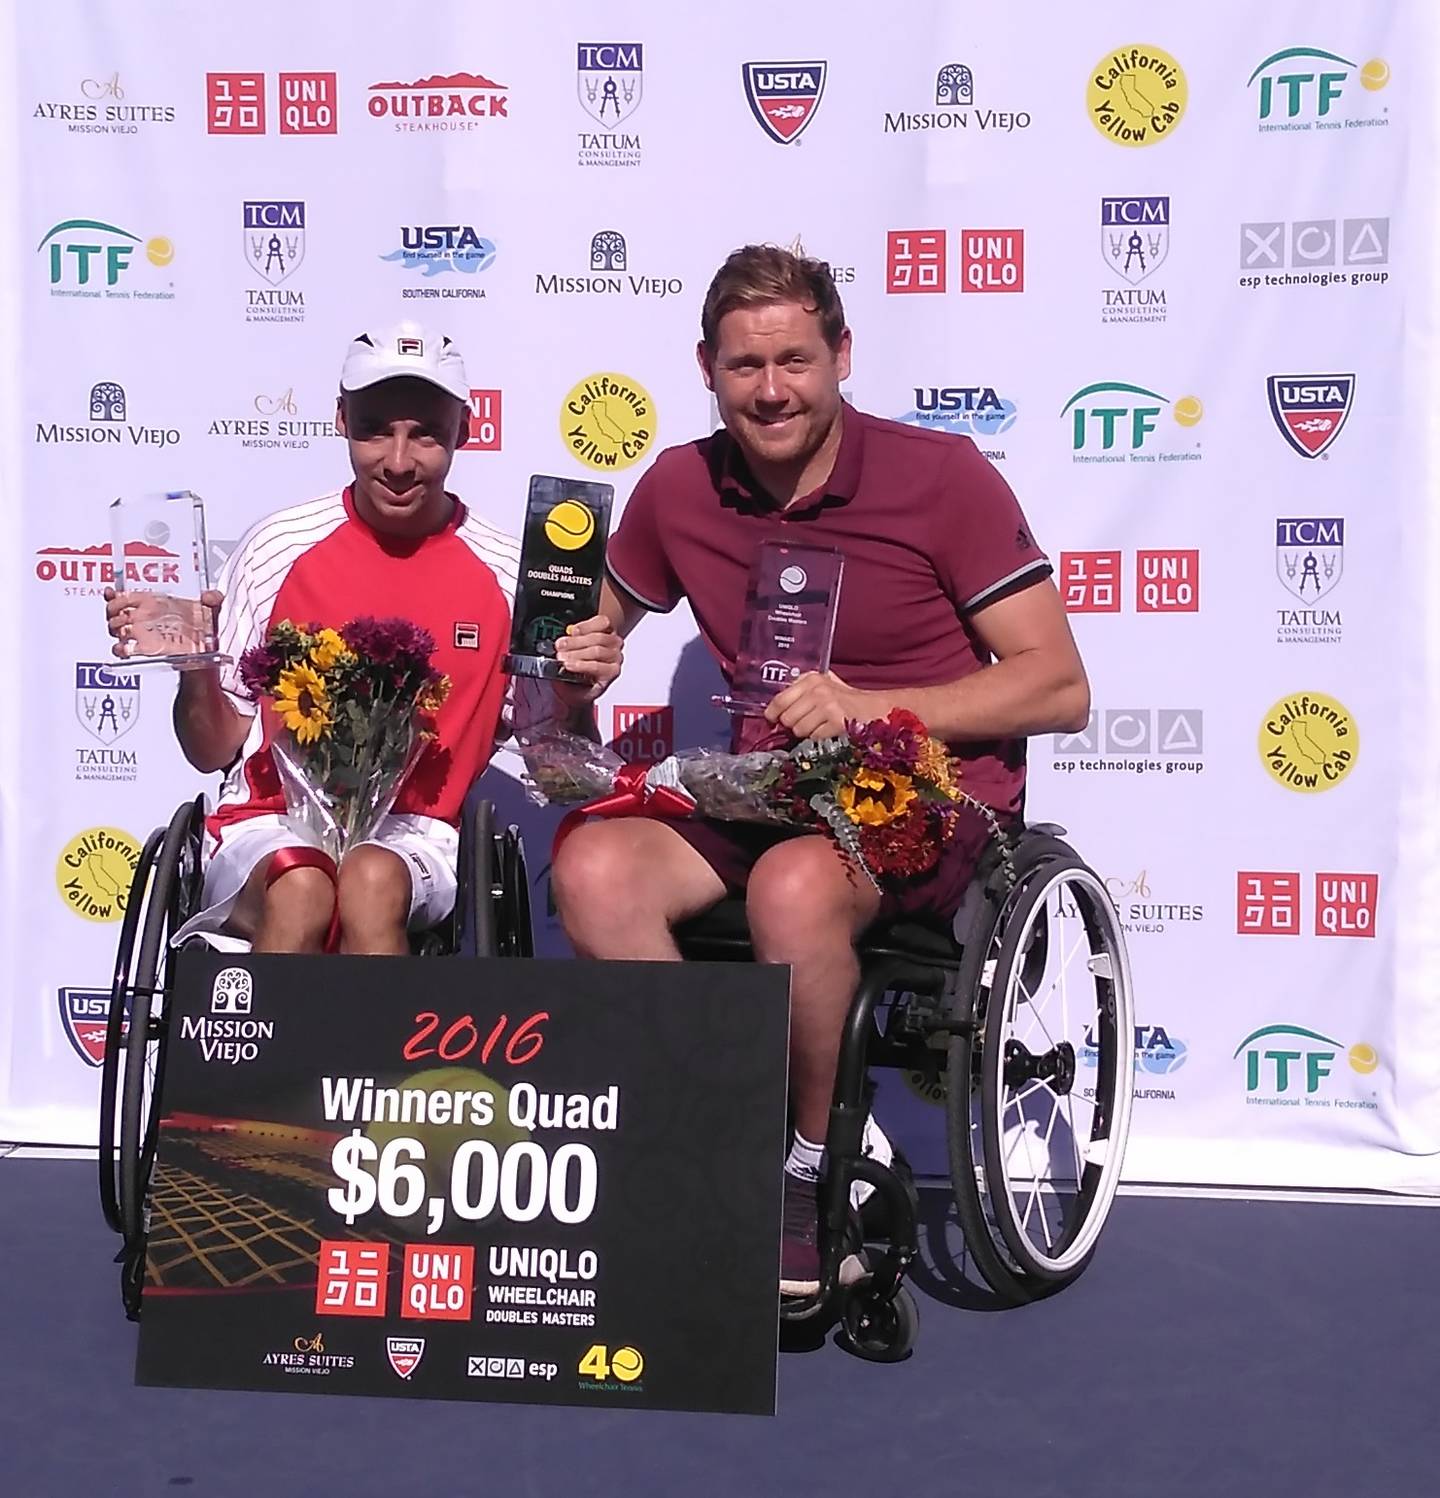 Andy Lapthorne and Antony Cotterill on podium at UNIQLO Wheelchair doubles Masters 